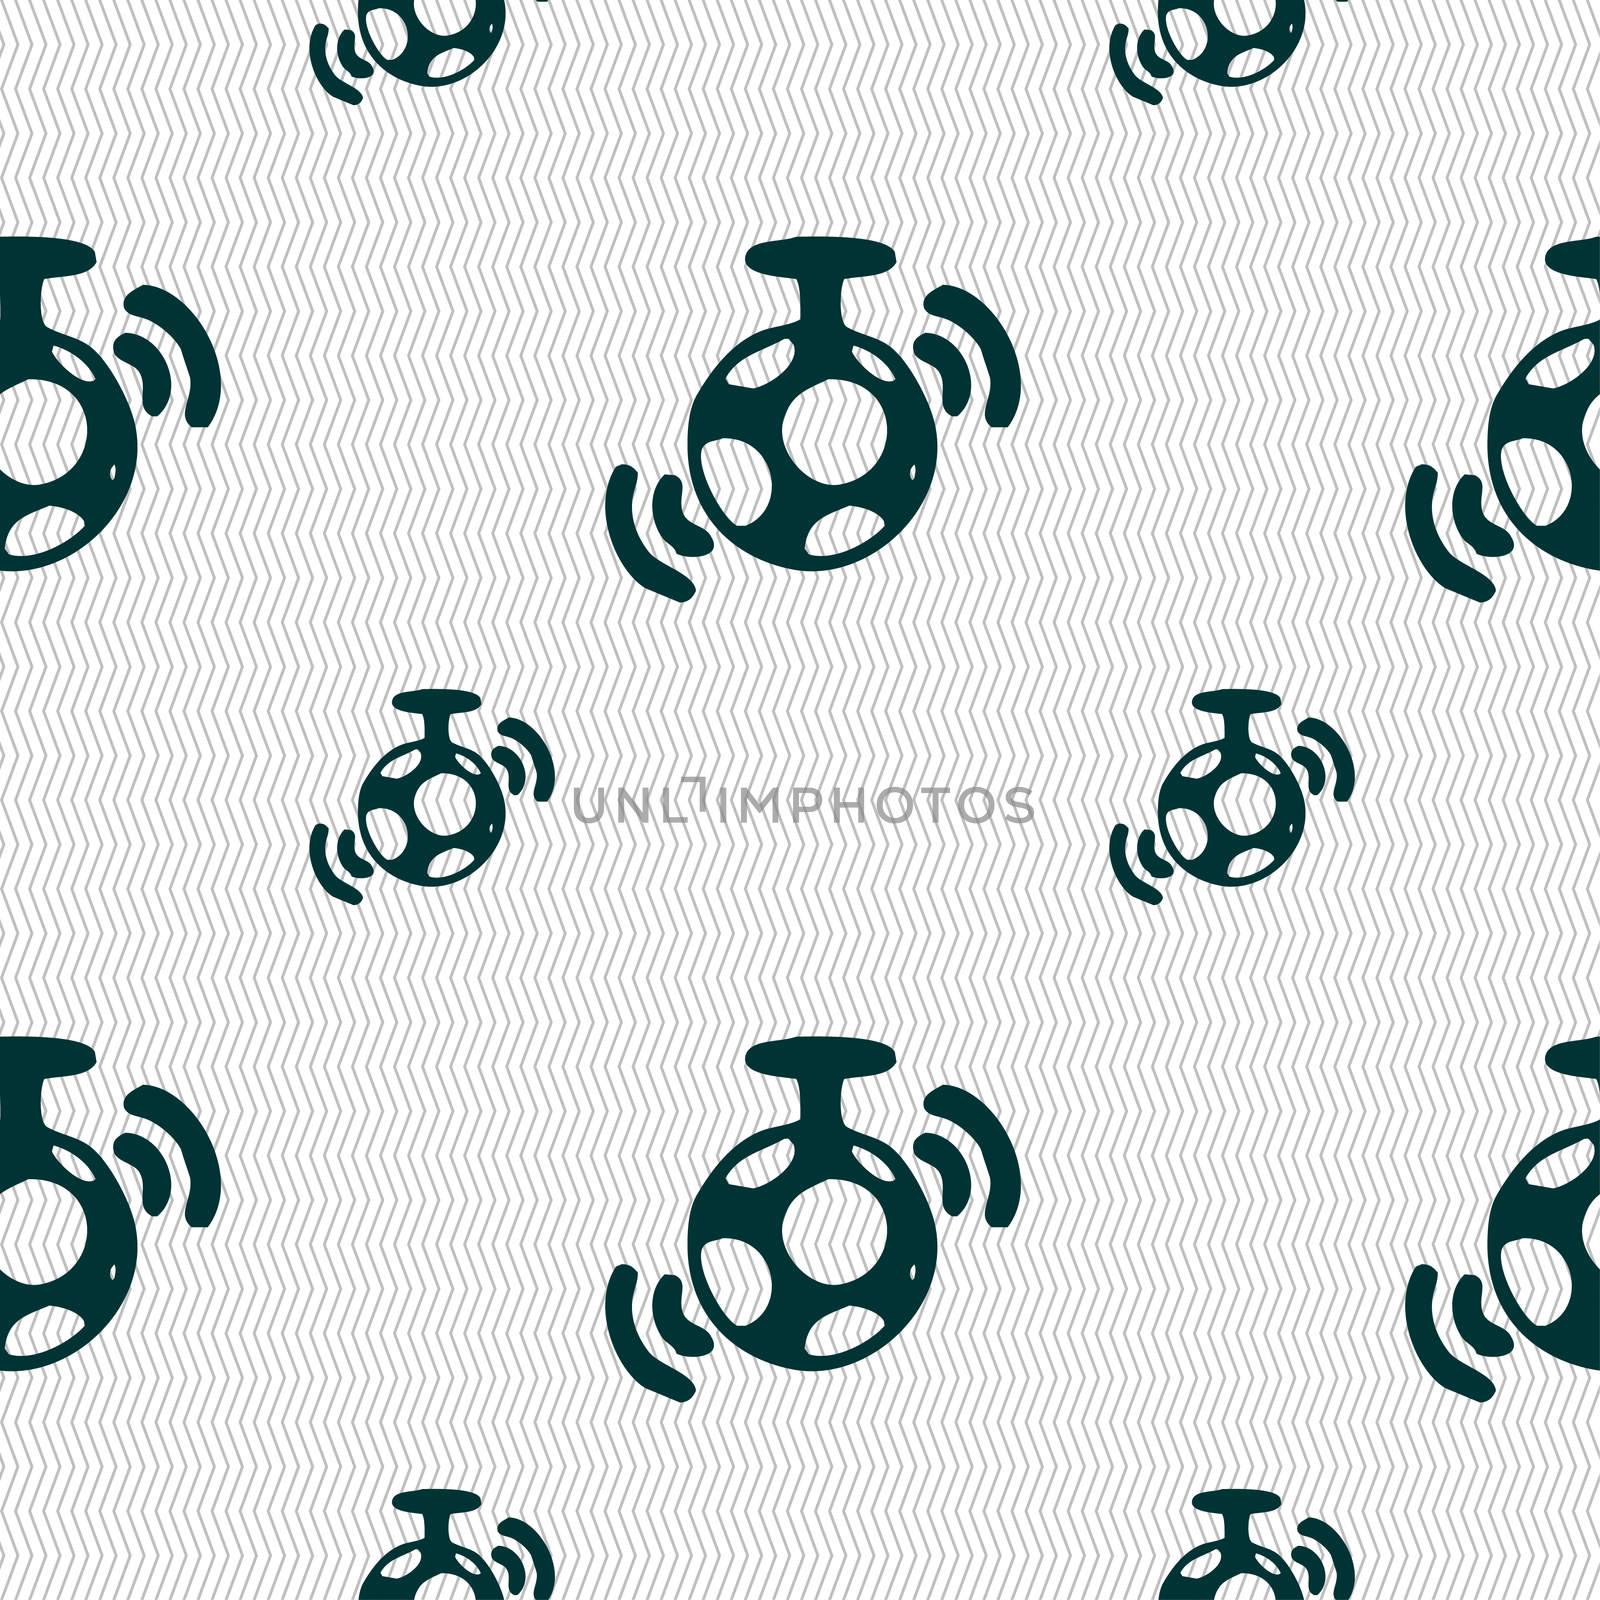 mirror ball disco icon sign. Seamless pattern with geometric texture. illustration